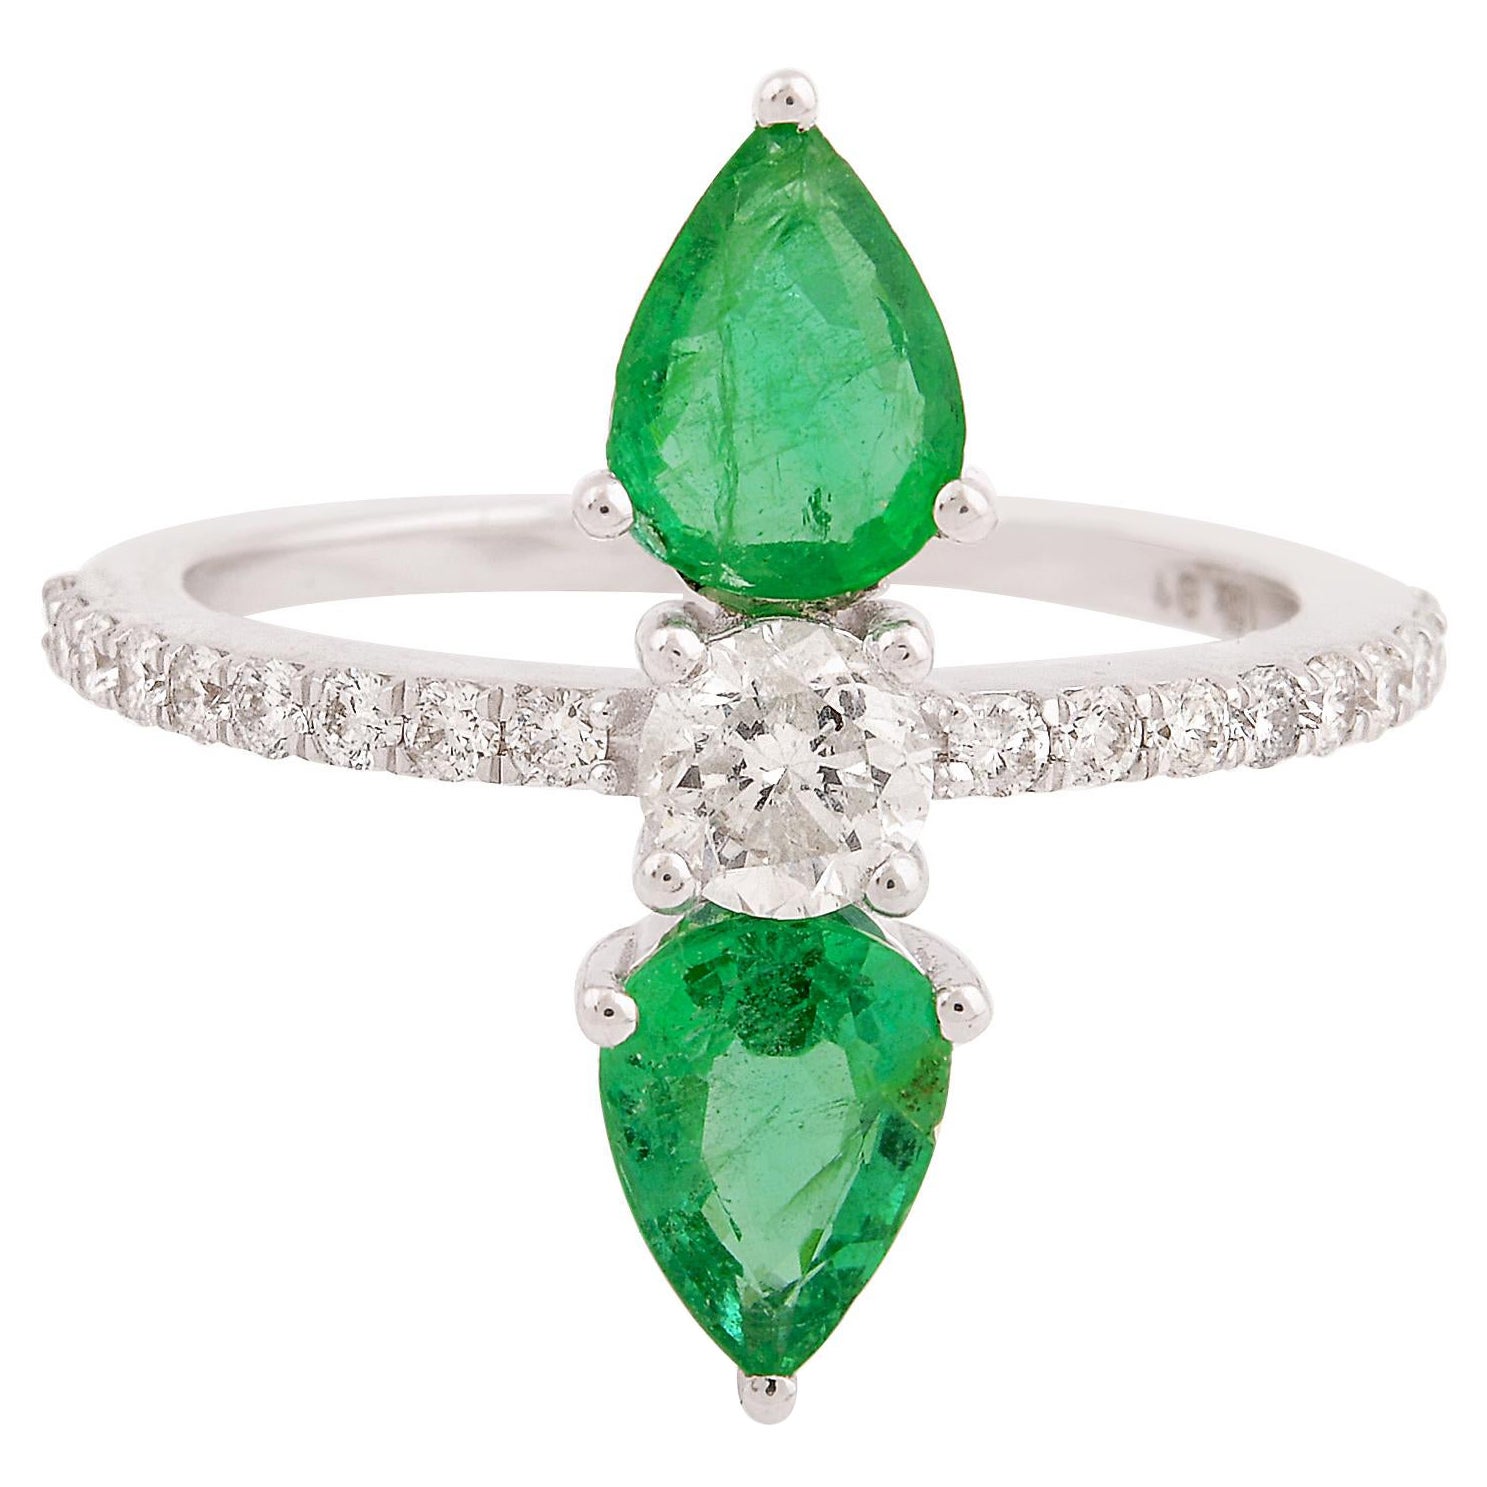 Pear Natural Emerald Gemstone Band Ring Diamond Solid 18k White Gold Jewelry